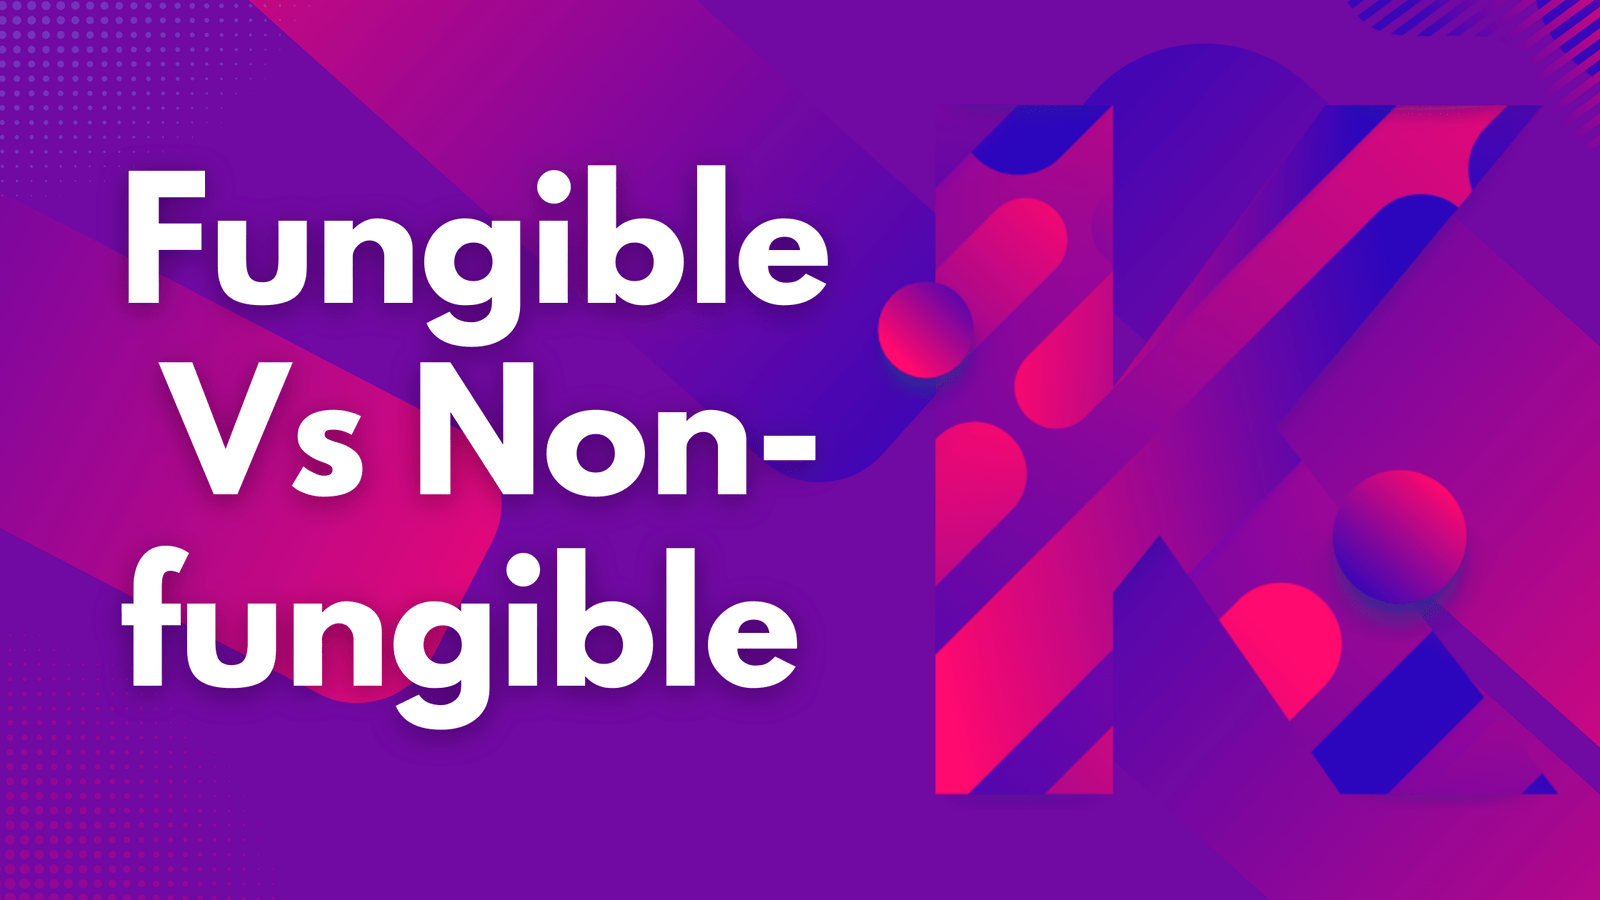 Fungible Vs Non-fungible in NFTs explained